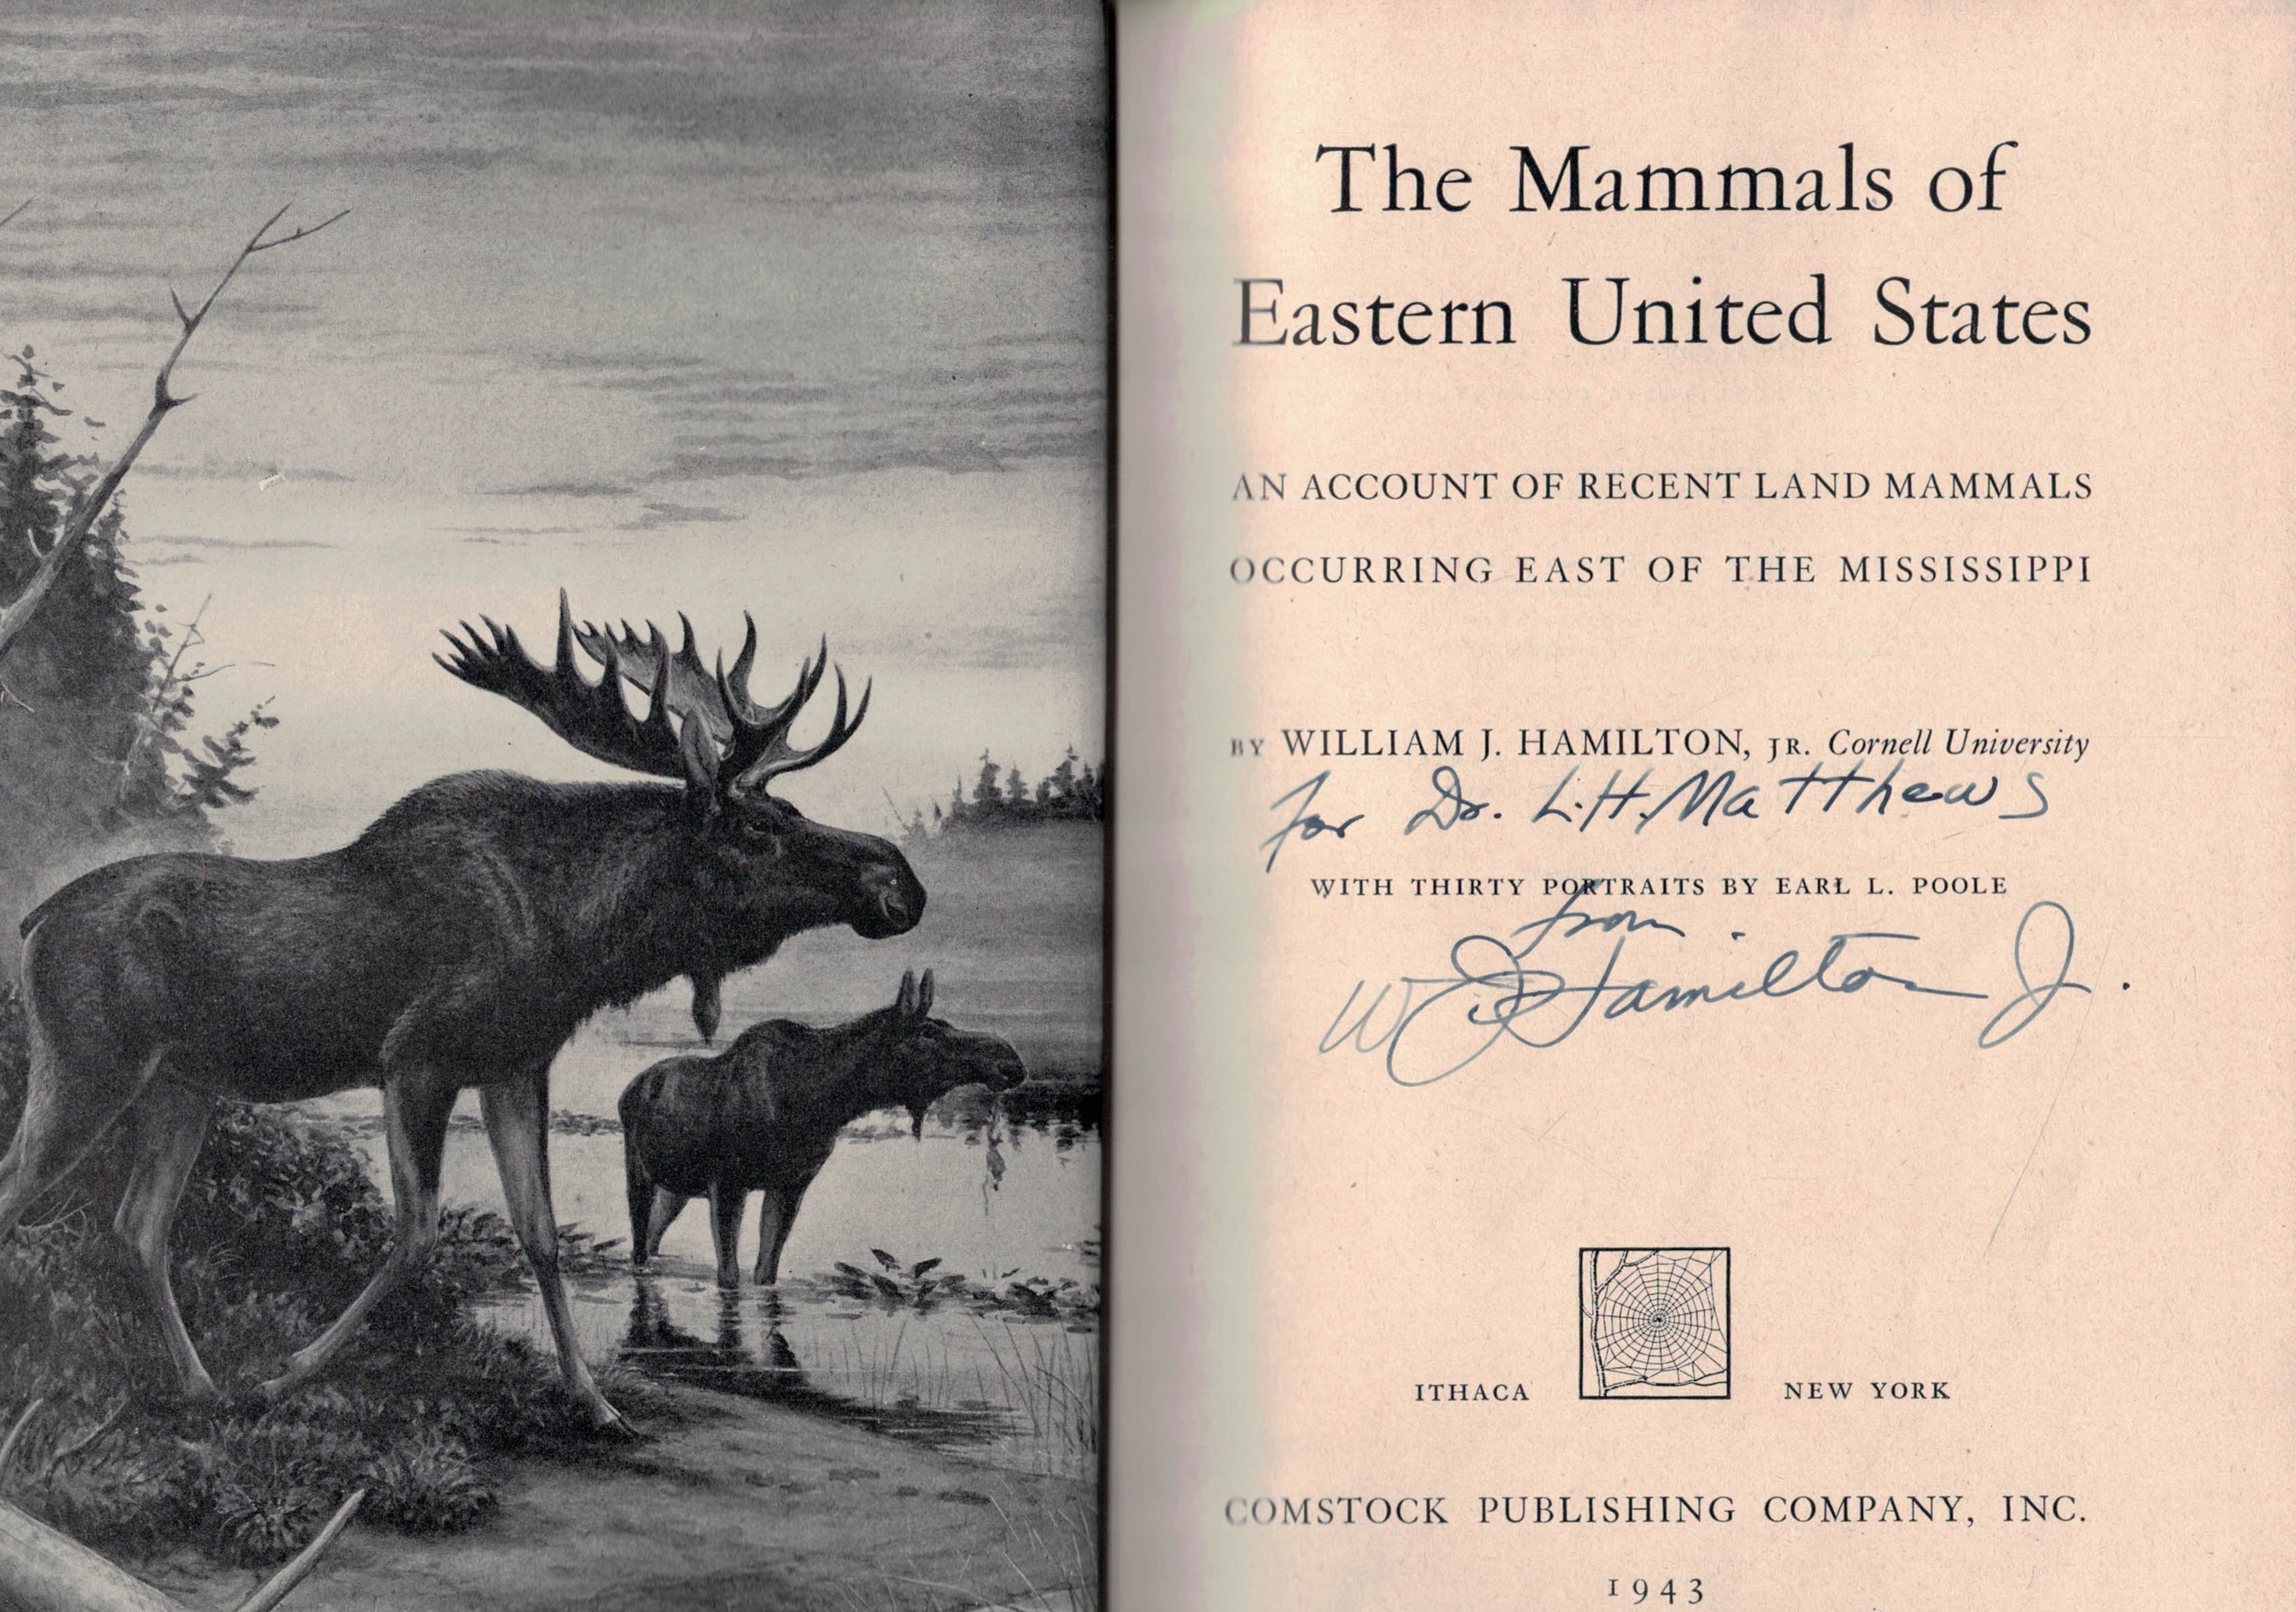 The Mammals of Eastern United States. An Account of Recent Land Mammals Occuring East of the Mississippi. Signed copy.